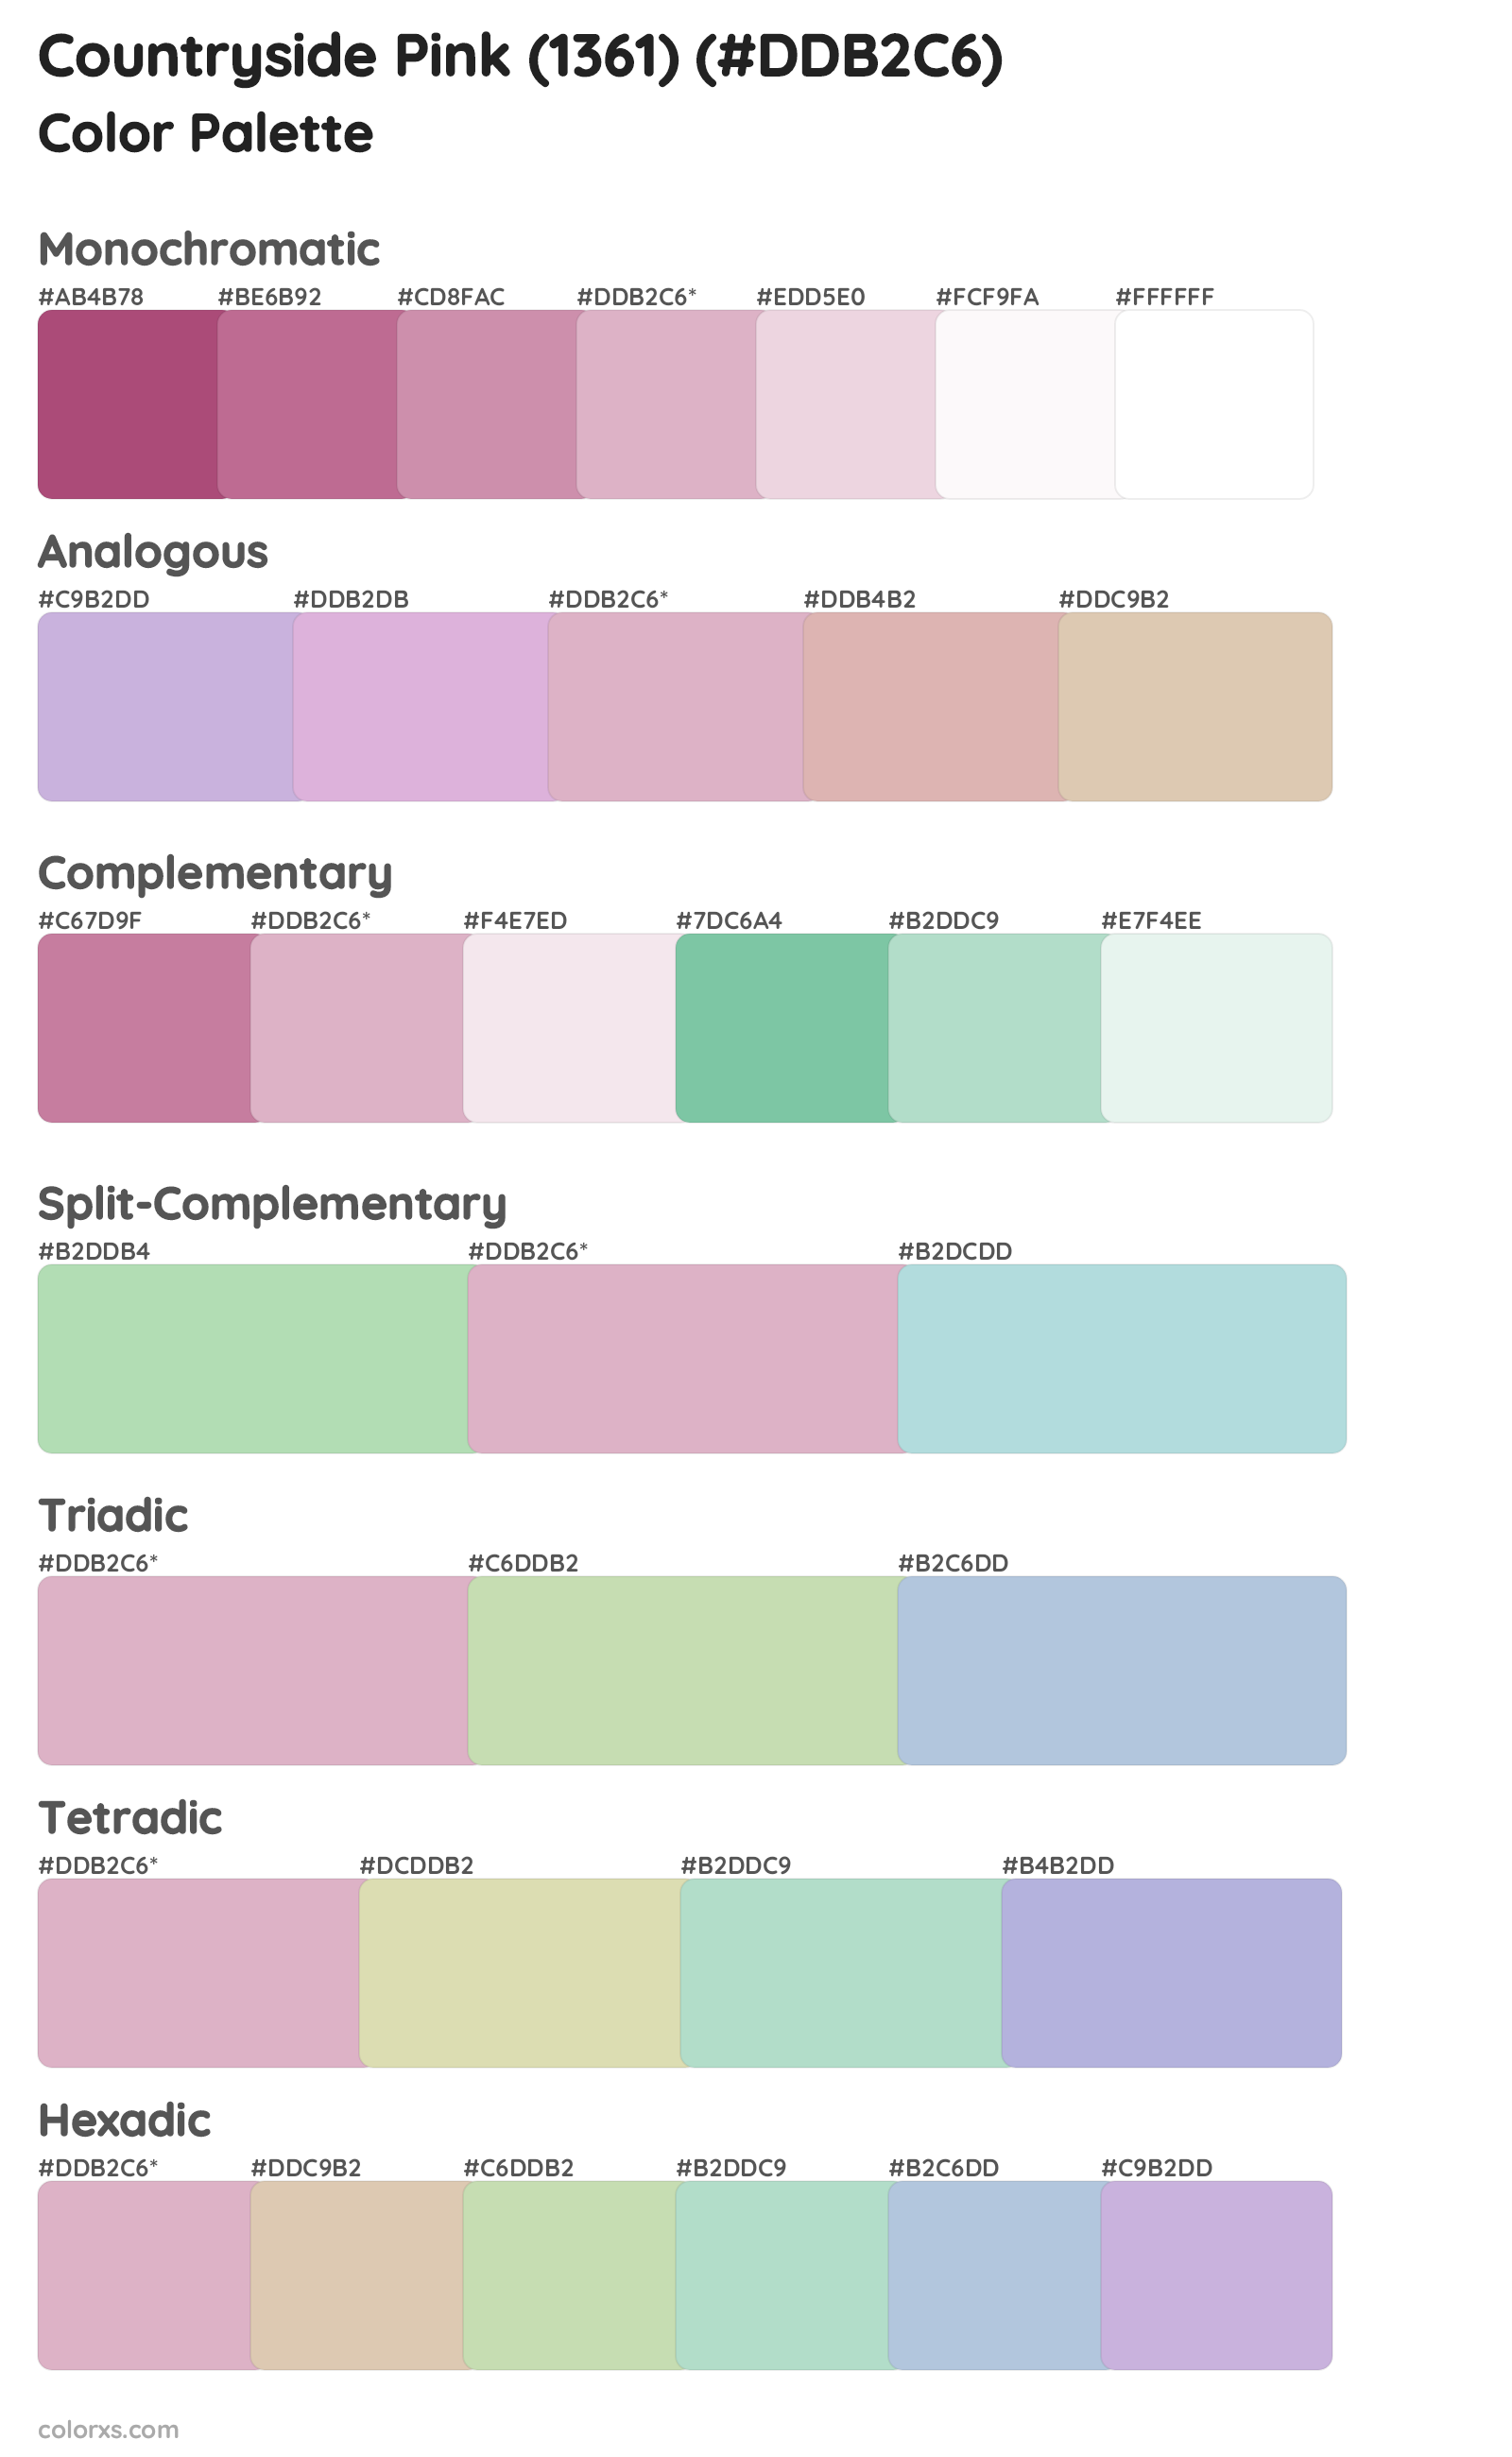 Countryside Pink (1361) Color Scheme Palettes